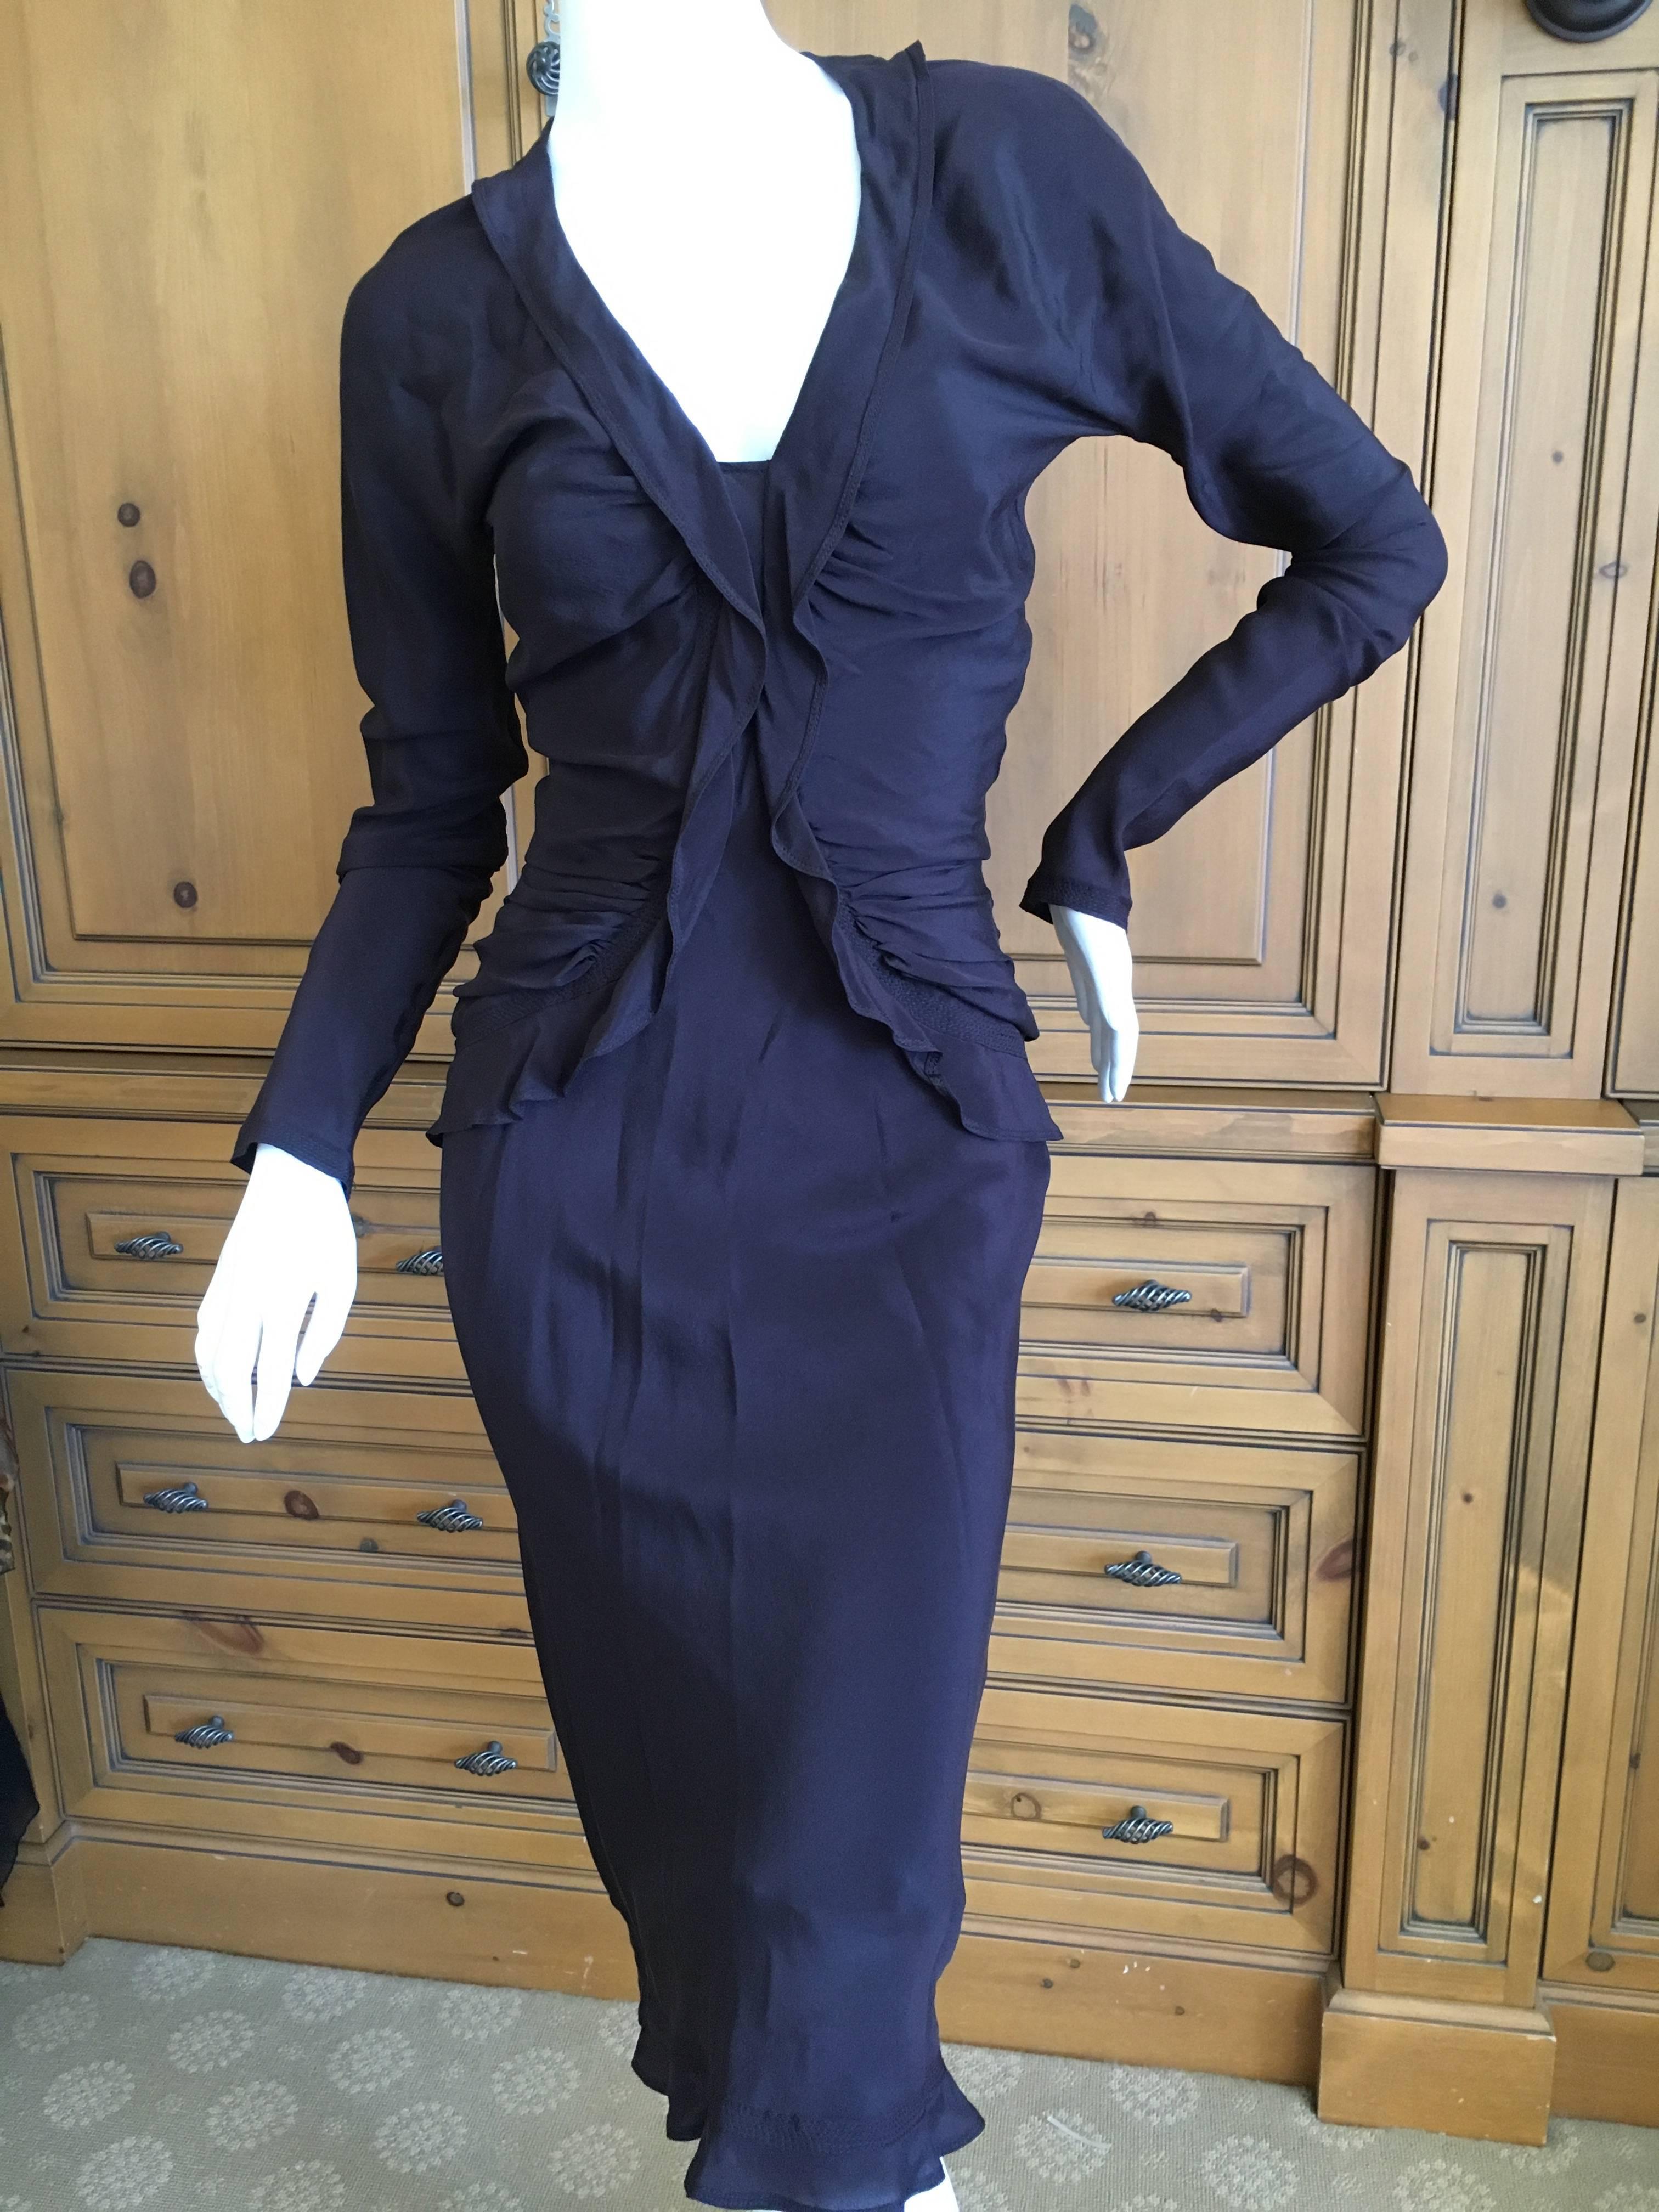 Yves Saint Laurent by Tom Ford Little Black Dress with Ruffle Details In Excellent Condition For Sale In Cloverdale, CA